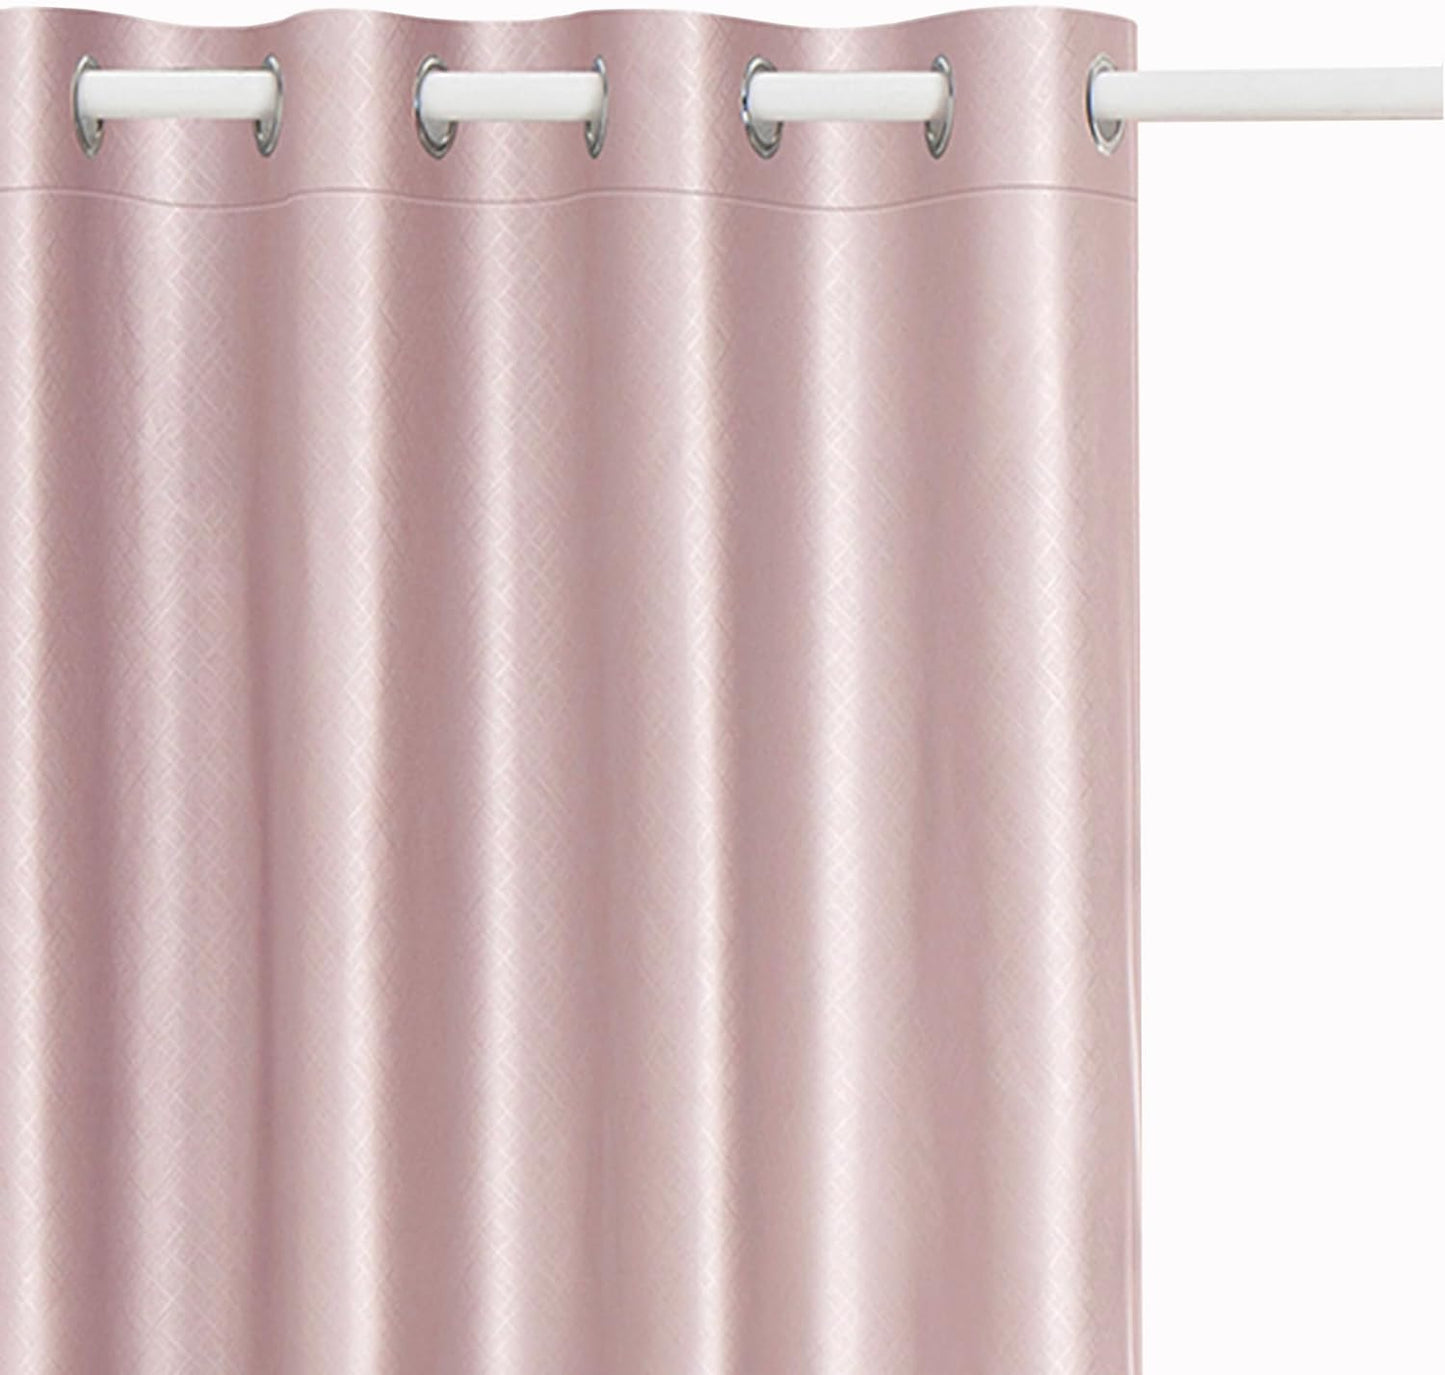 Silver 100% Blackout Curtains for Bedroom, 3 Thick Layers Thermal Insulated Black Out Window Curtains, Full Room Darkening Noise Reducing Grommet Curtains with Black Liner (52 X 84 Inch, 2 Panels)  CZL Pink 52"W X 63"H 